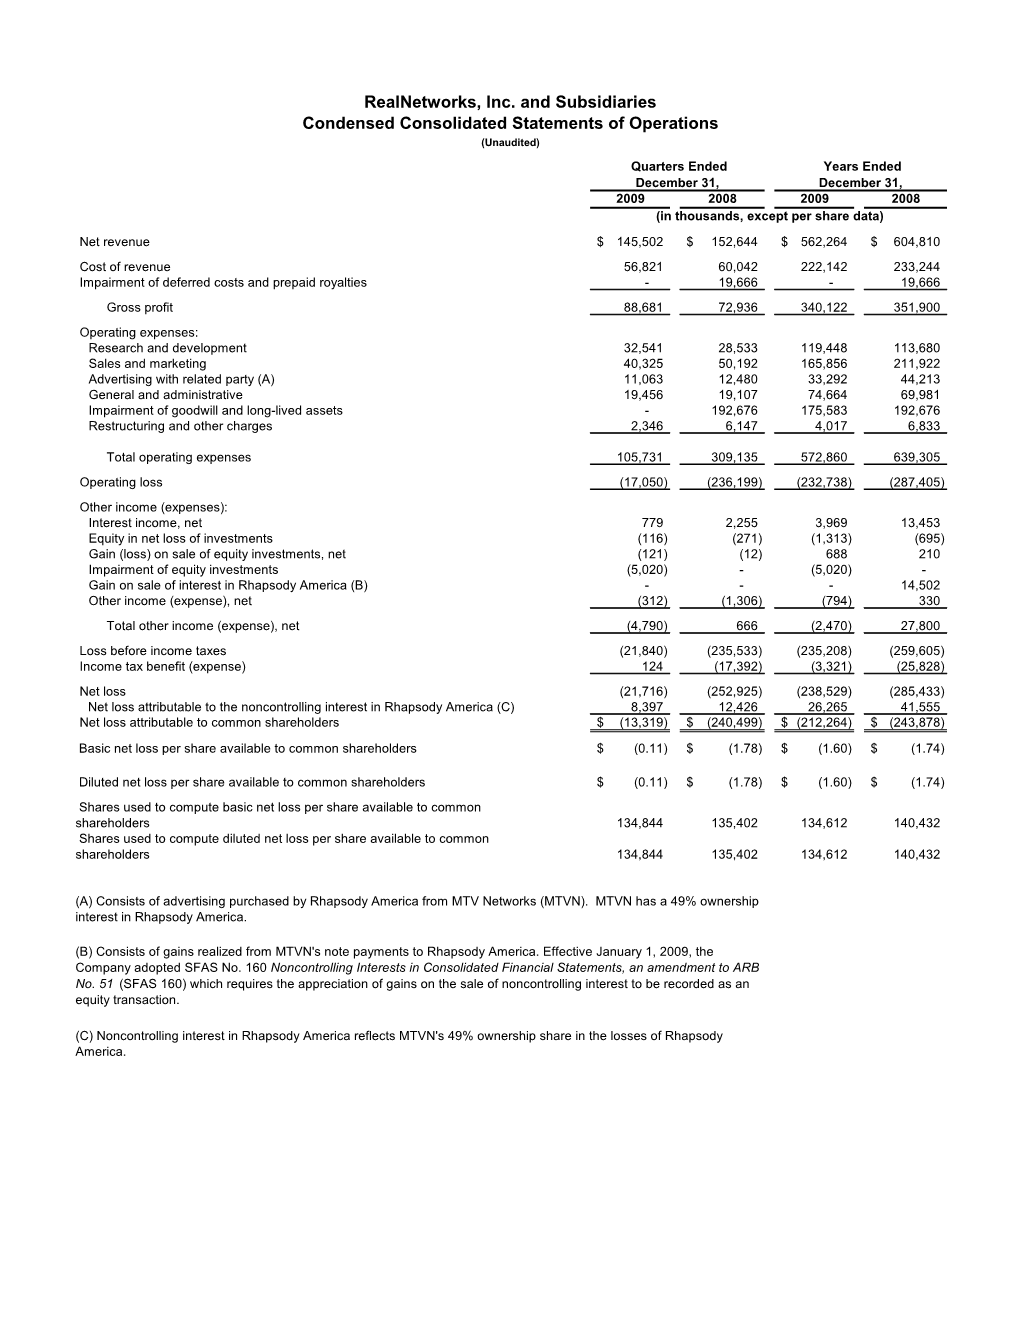 Realnetworks, Inc. and Subsidiaries Condensed Consolidated Statement of Operations